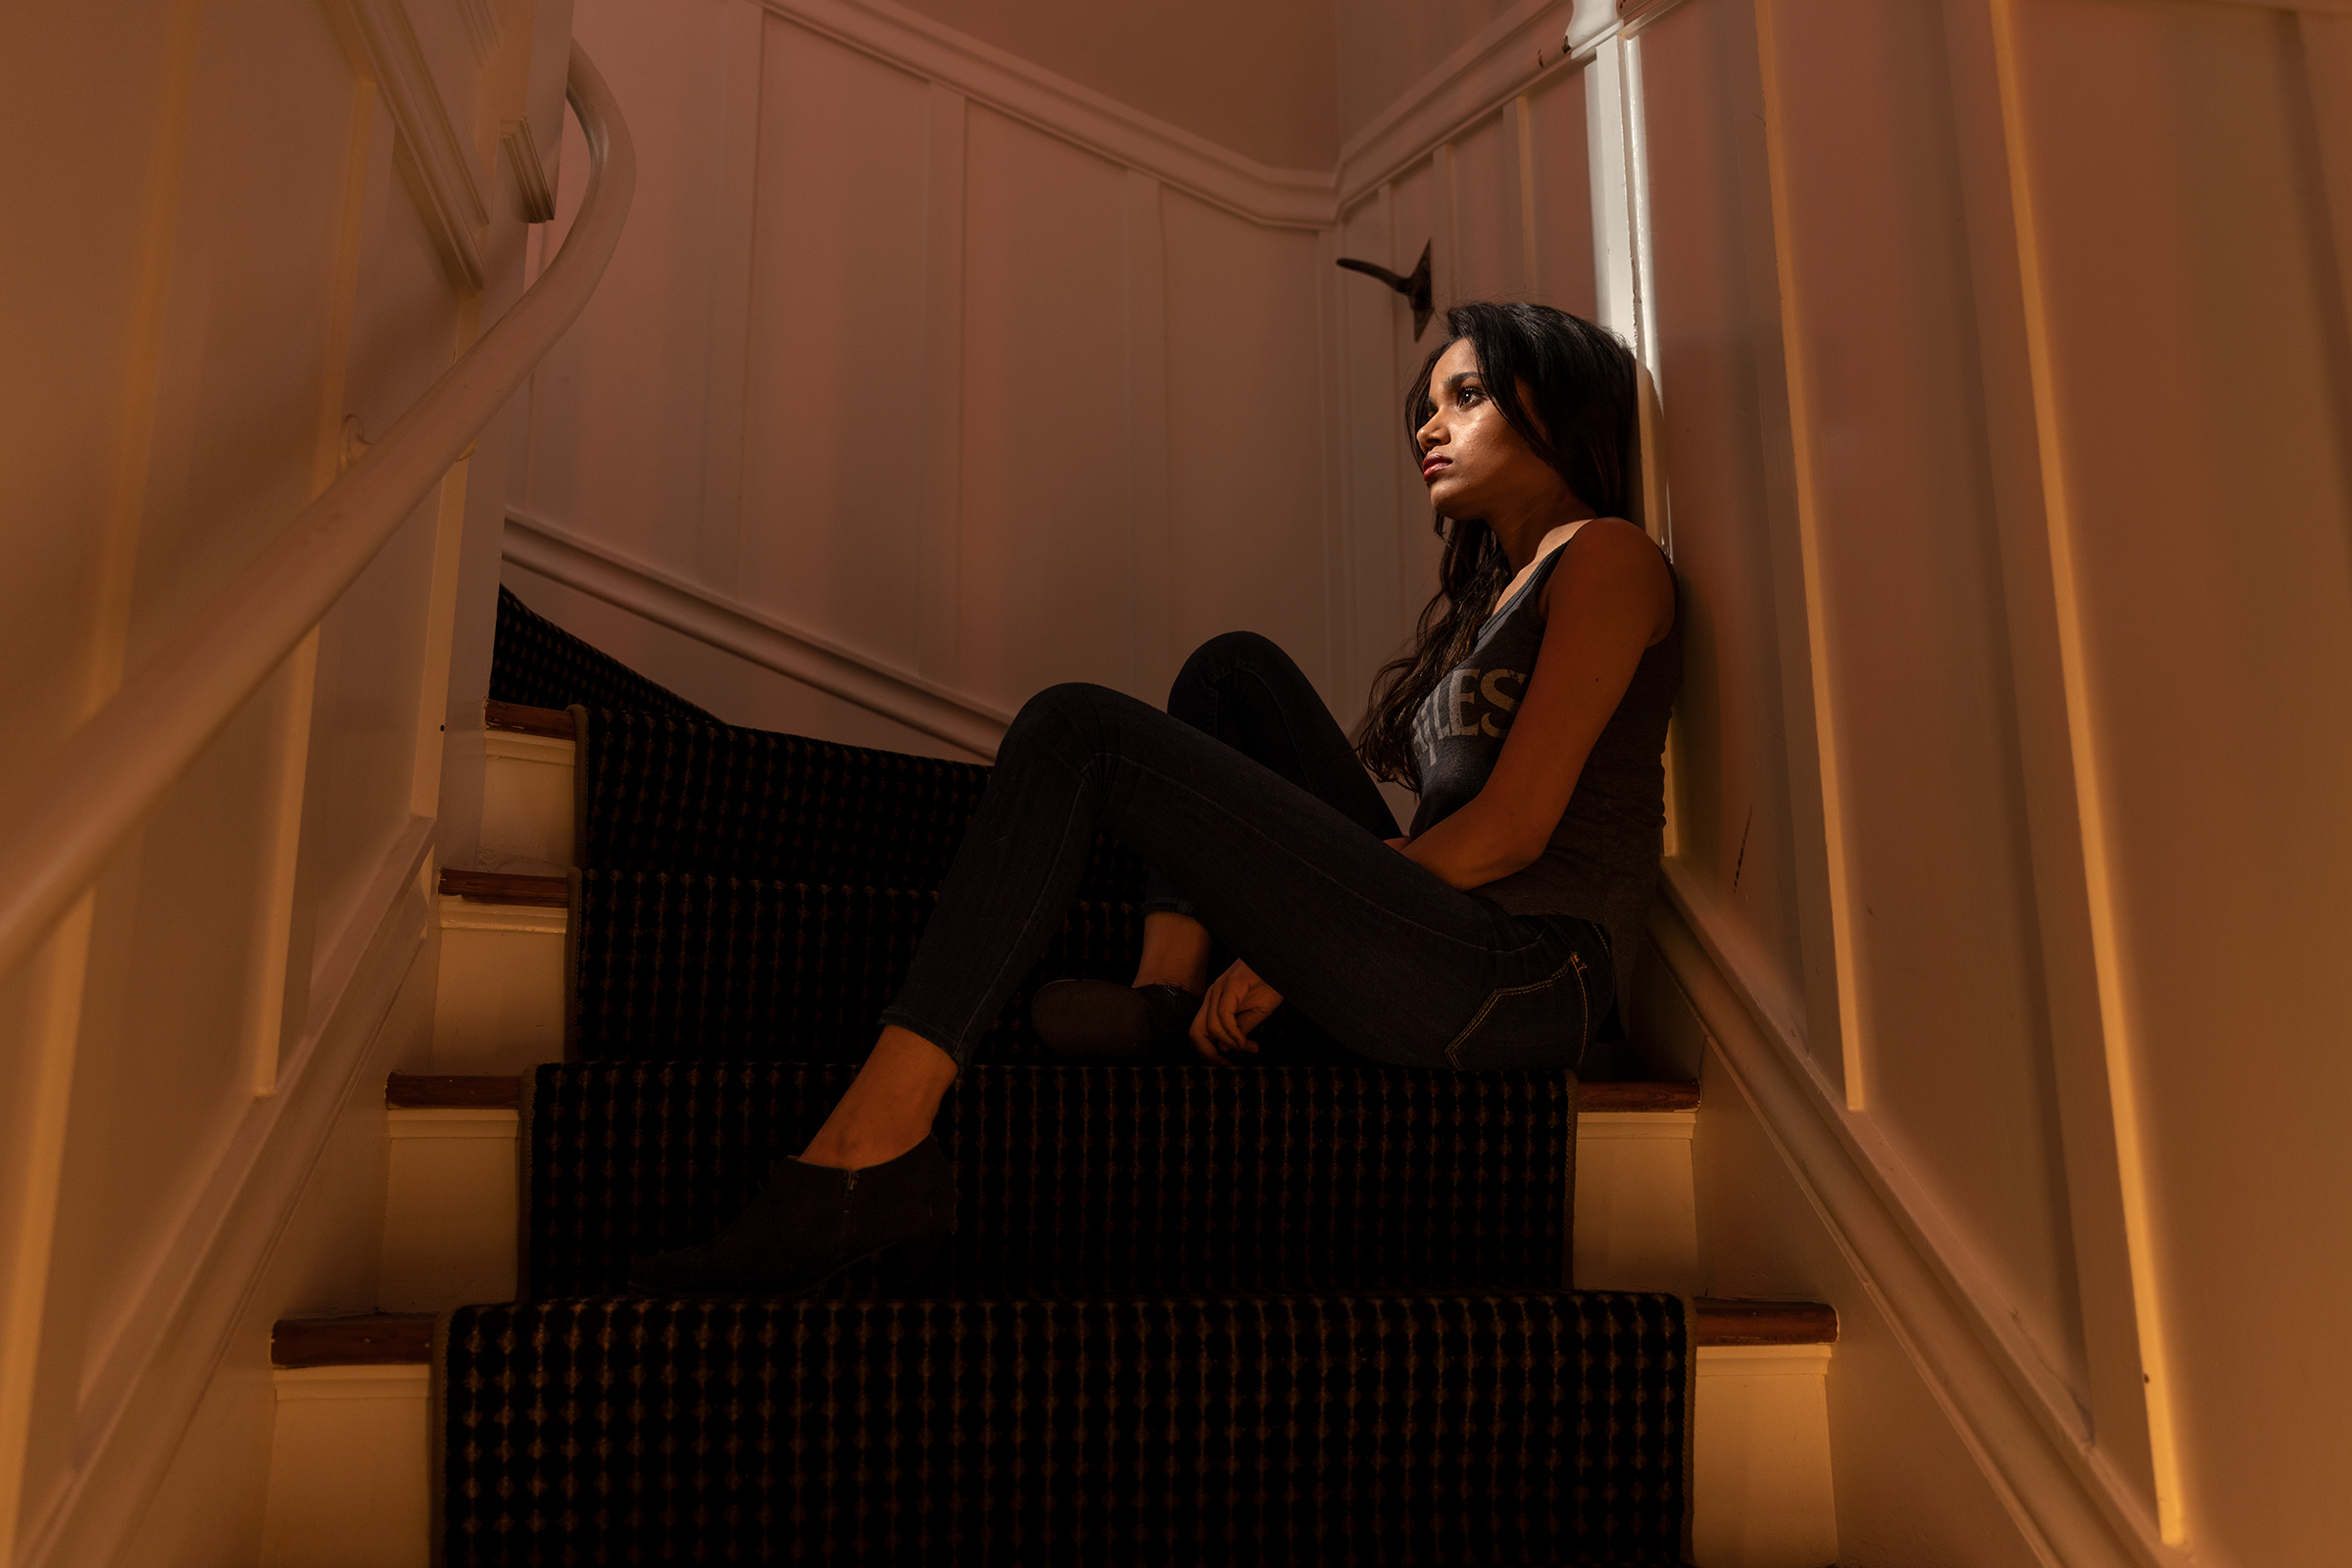 Keerthana Gopalakrishnan in her home in San Francisco on Jan. 29. (Helynn Ospina for TIME)